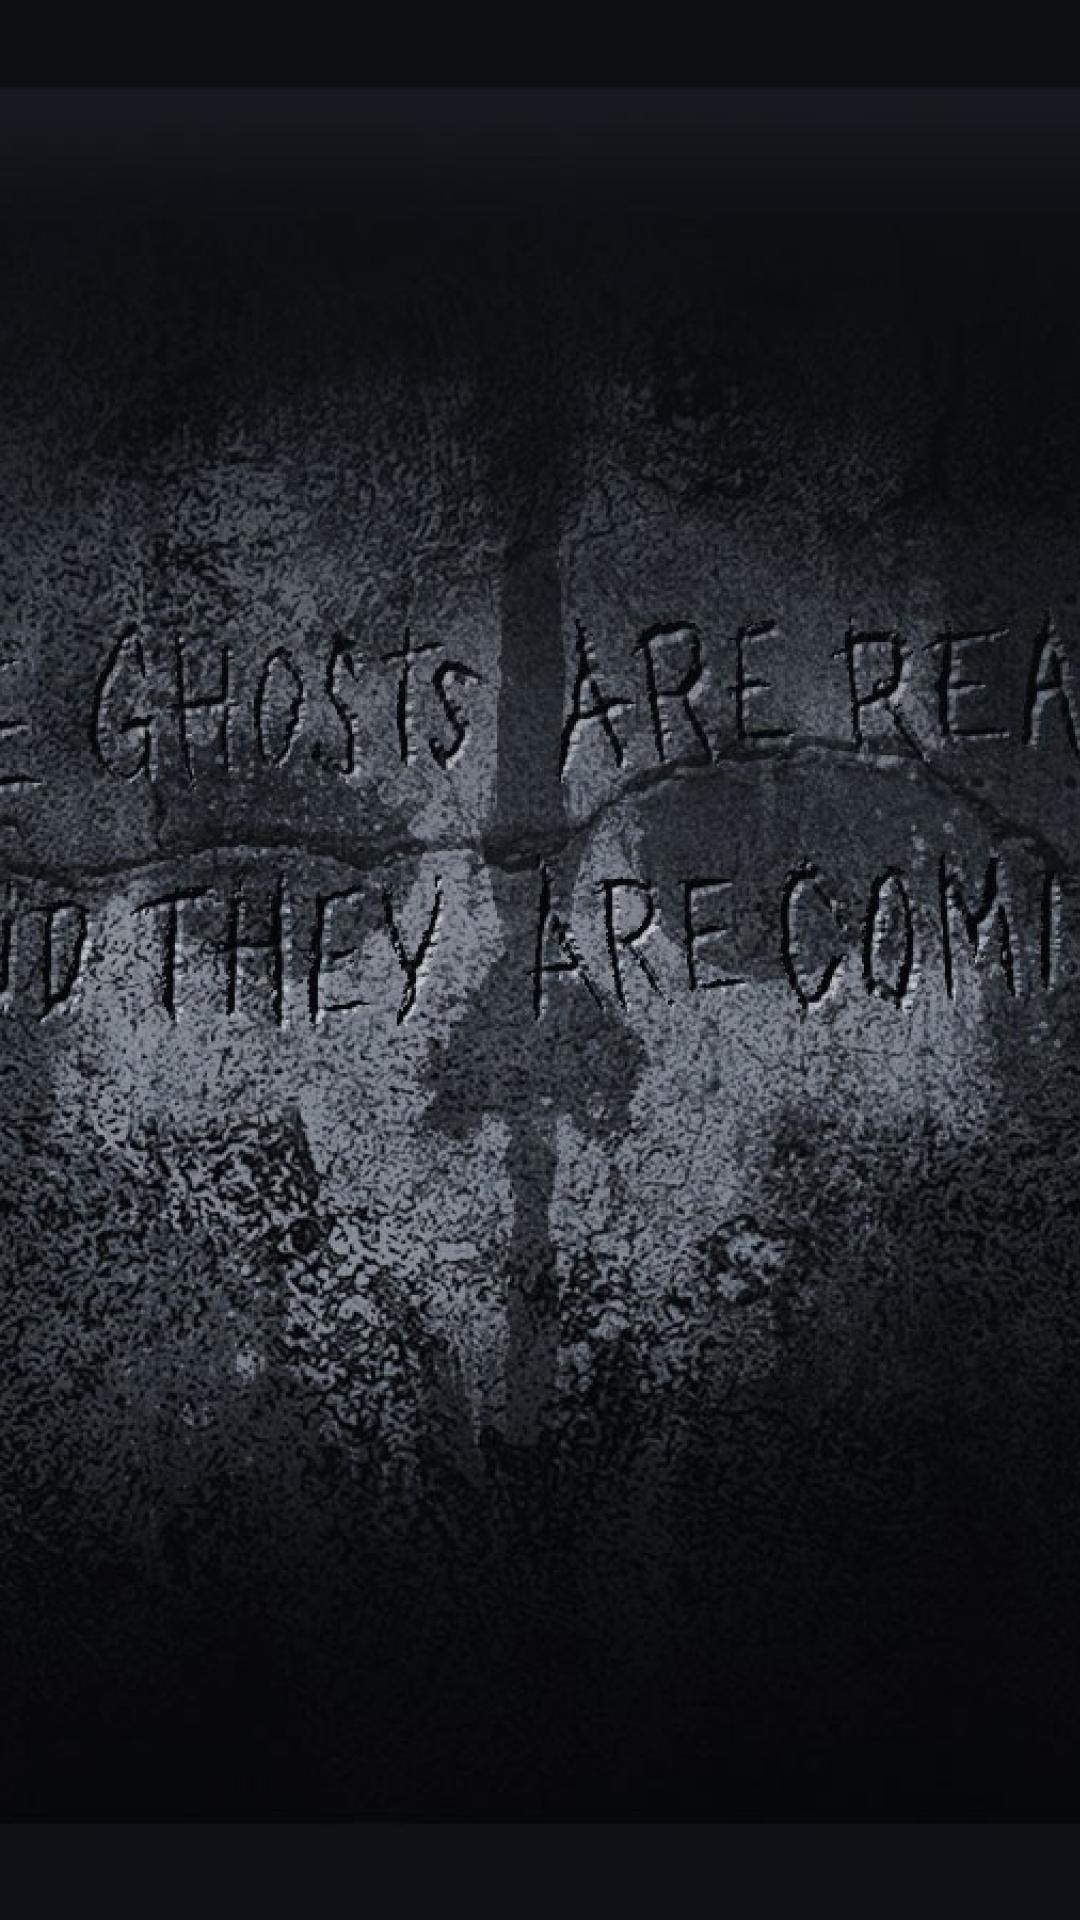 Wall call of duty: ghosts wallpaper